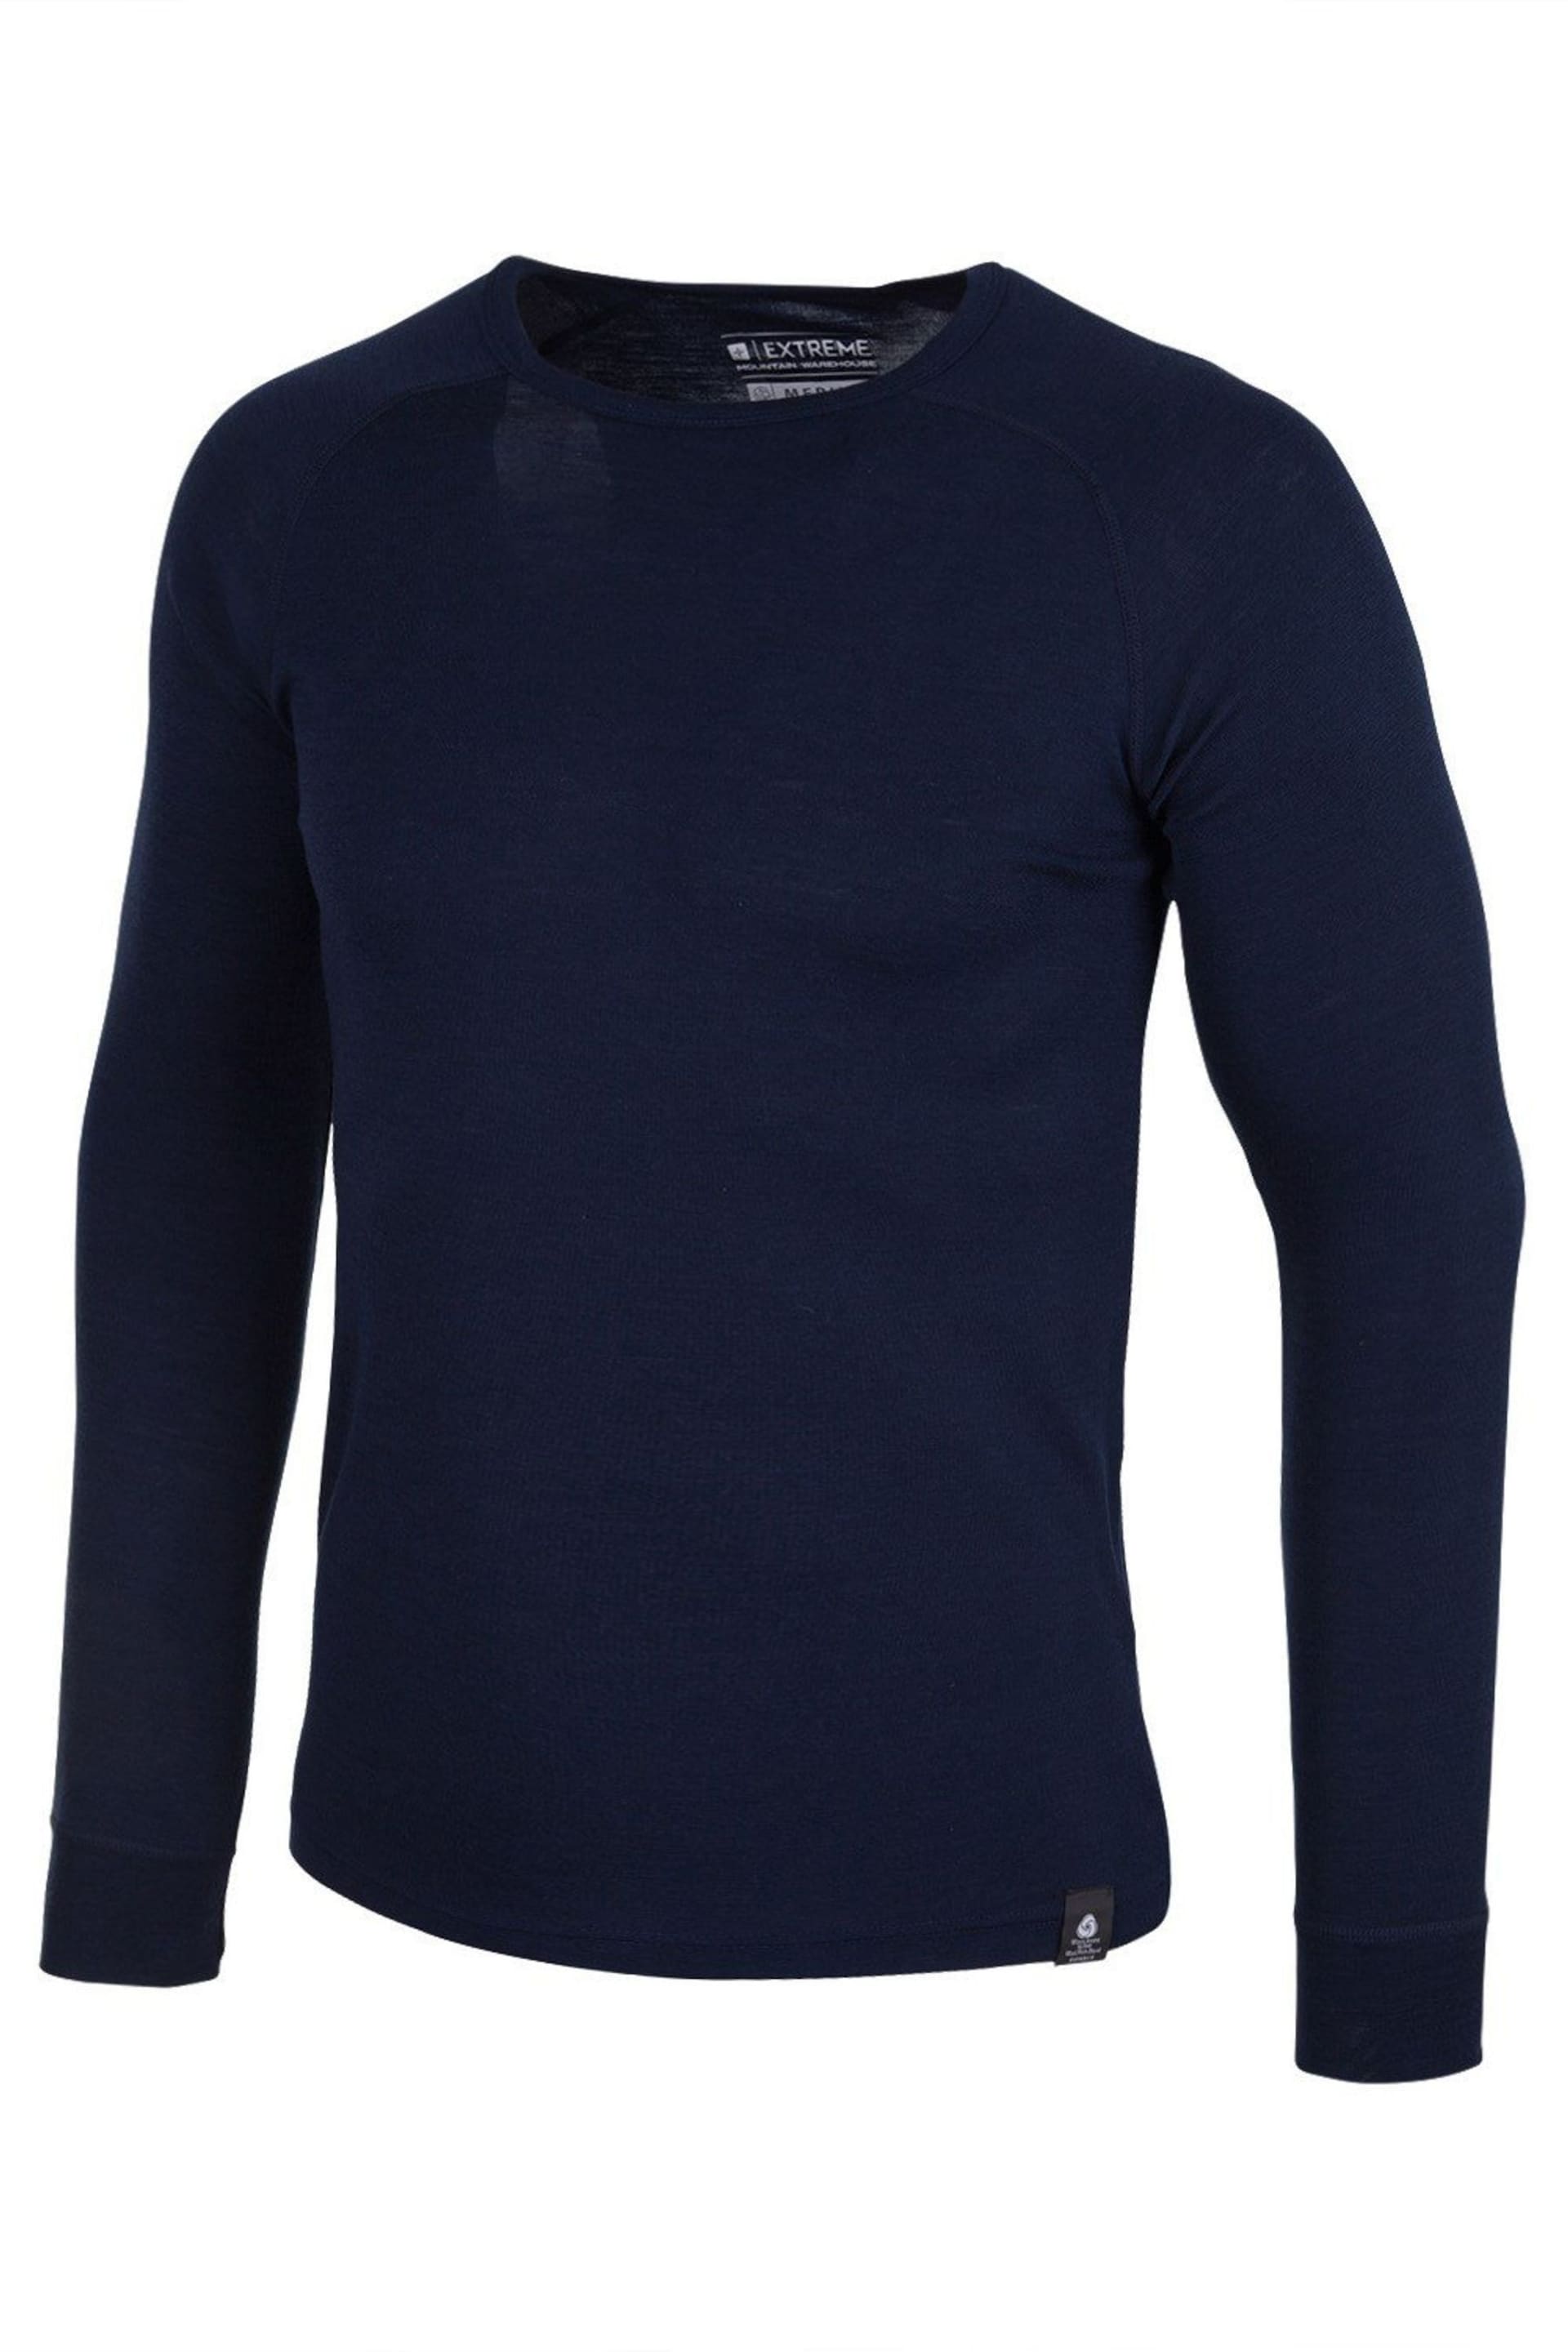 Mountain Warehouse Blue Merino Thermal Top Multipack - Image 2 of 2